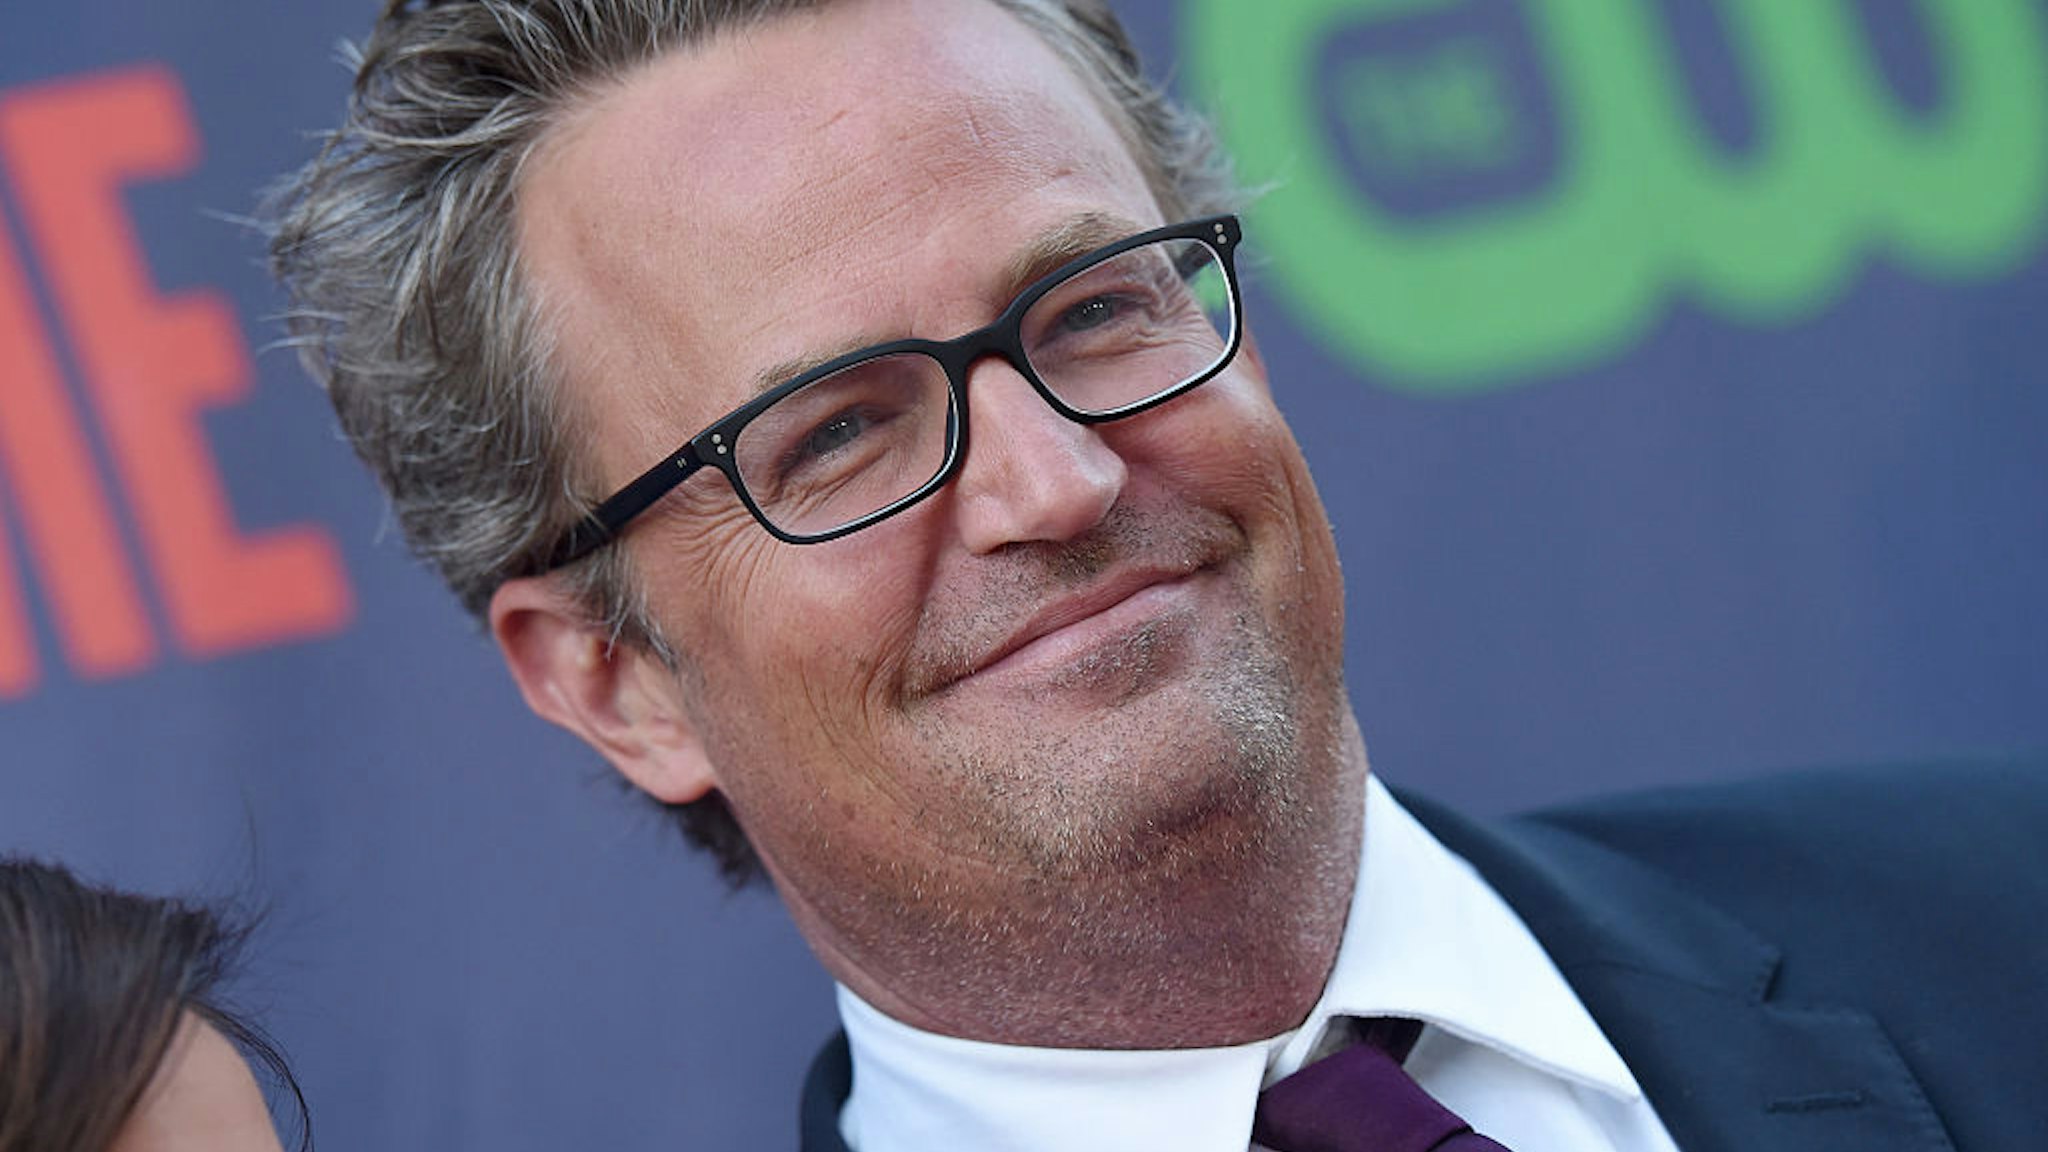 WEST HOLLYWOOD, CA - AUGUST 10: Actor Matthew Perry arrives at CBS, CW And Showtime 2015 Summer TCA Party at Pacific Design Center on August 10, 2015 in West Hollywood, California. (Photo by Axelle/Bauer-Griffin/FilmMagic)